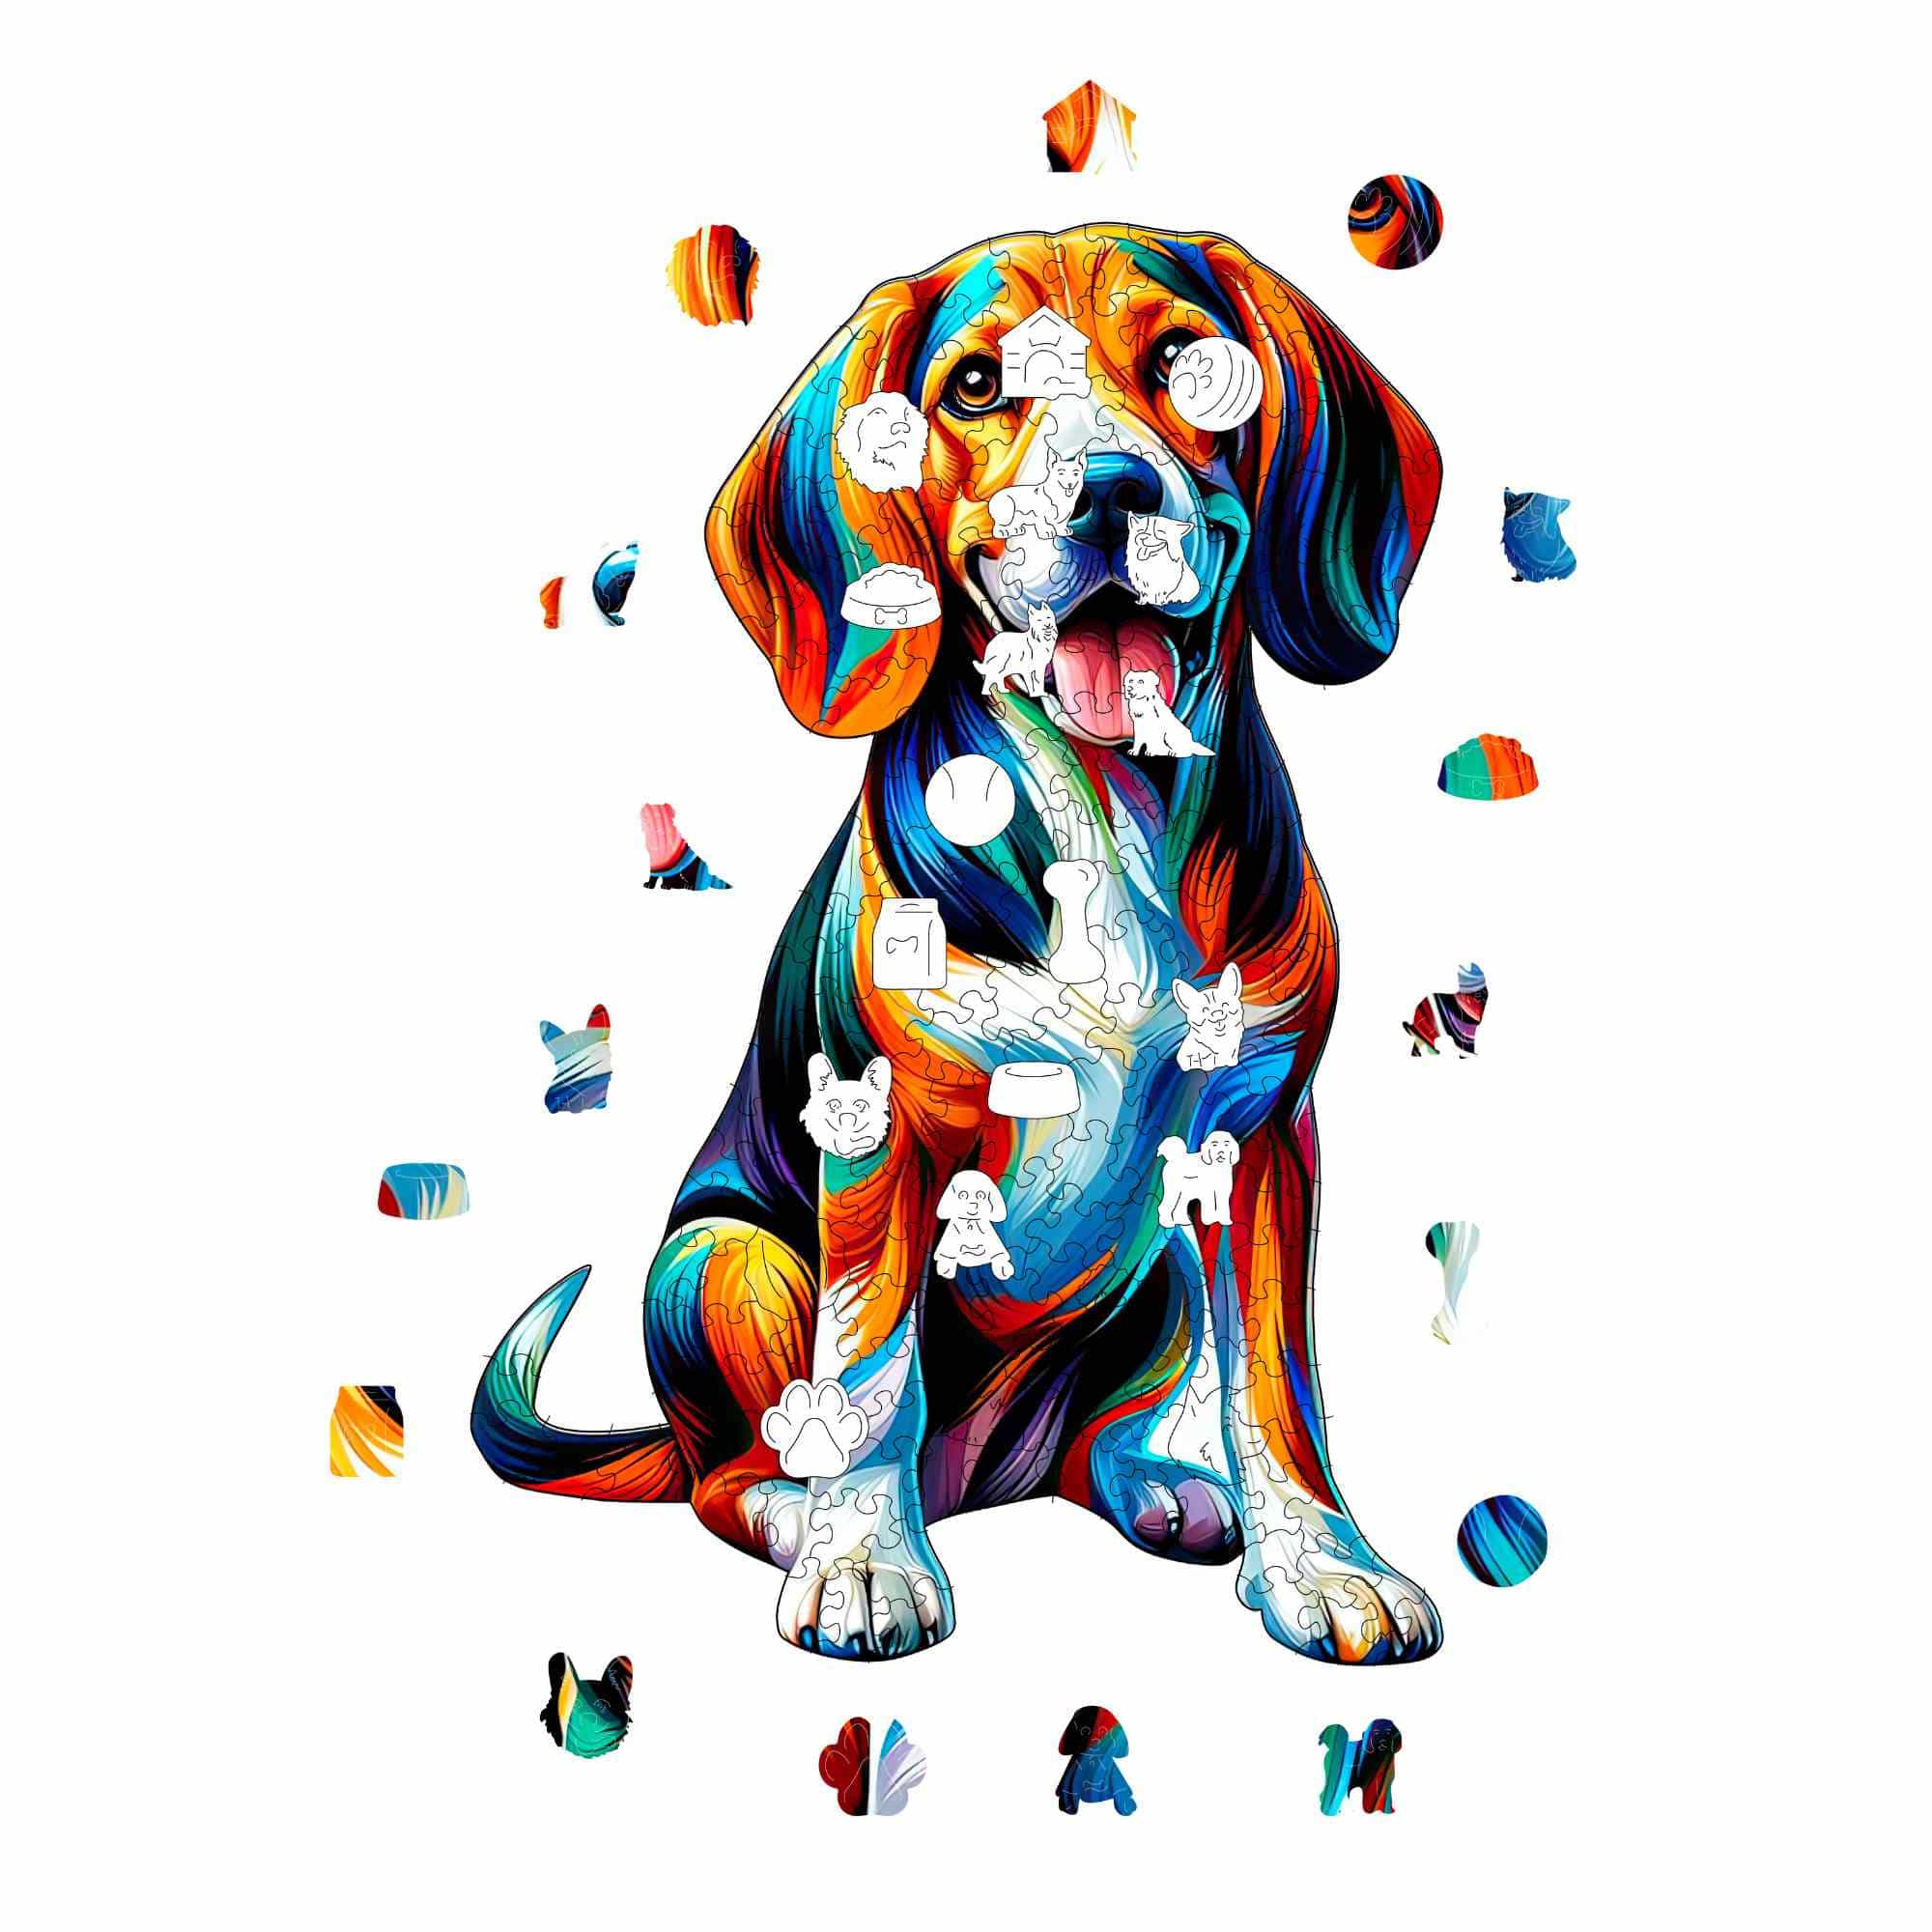 Animal Jigsaw Puzzle > Wooden Jigsaw Puzzle > Jigsaw Puzzle Coonhound Dog - Jigsaw Puzzle